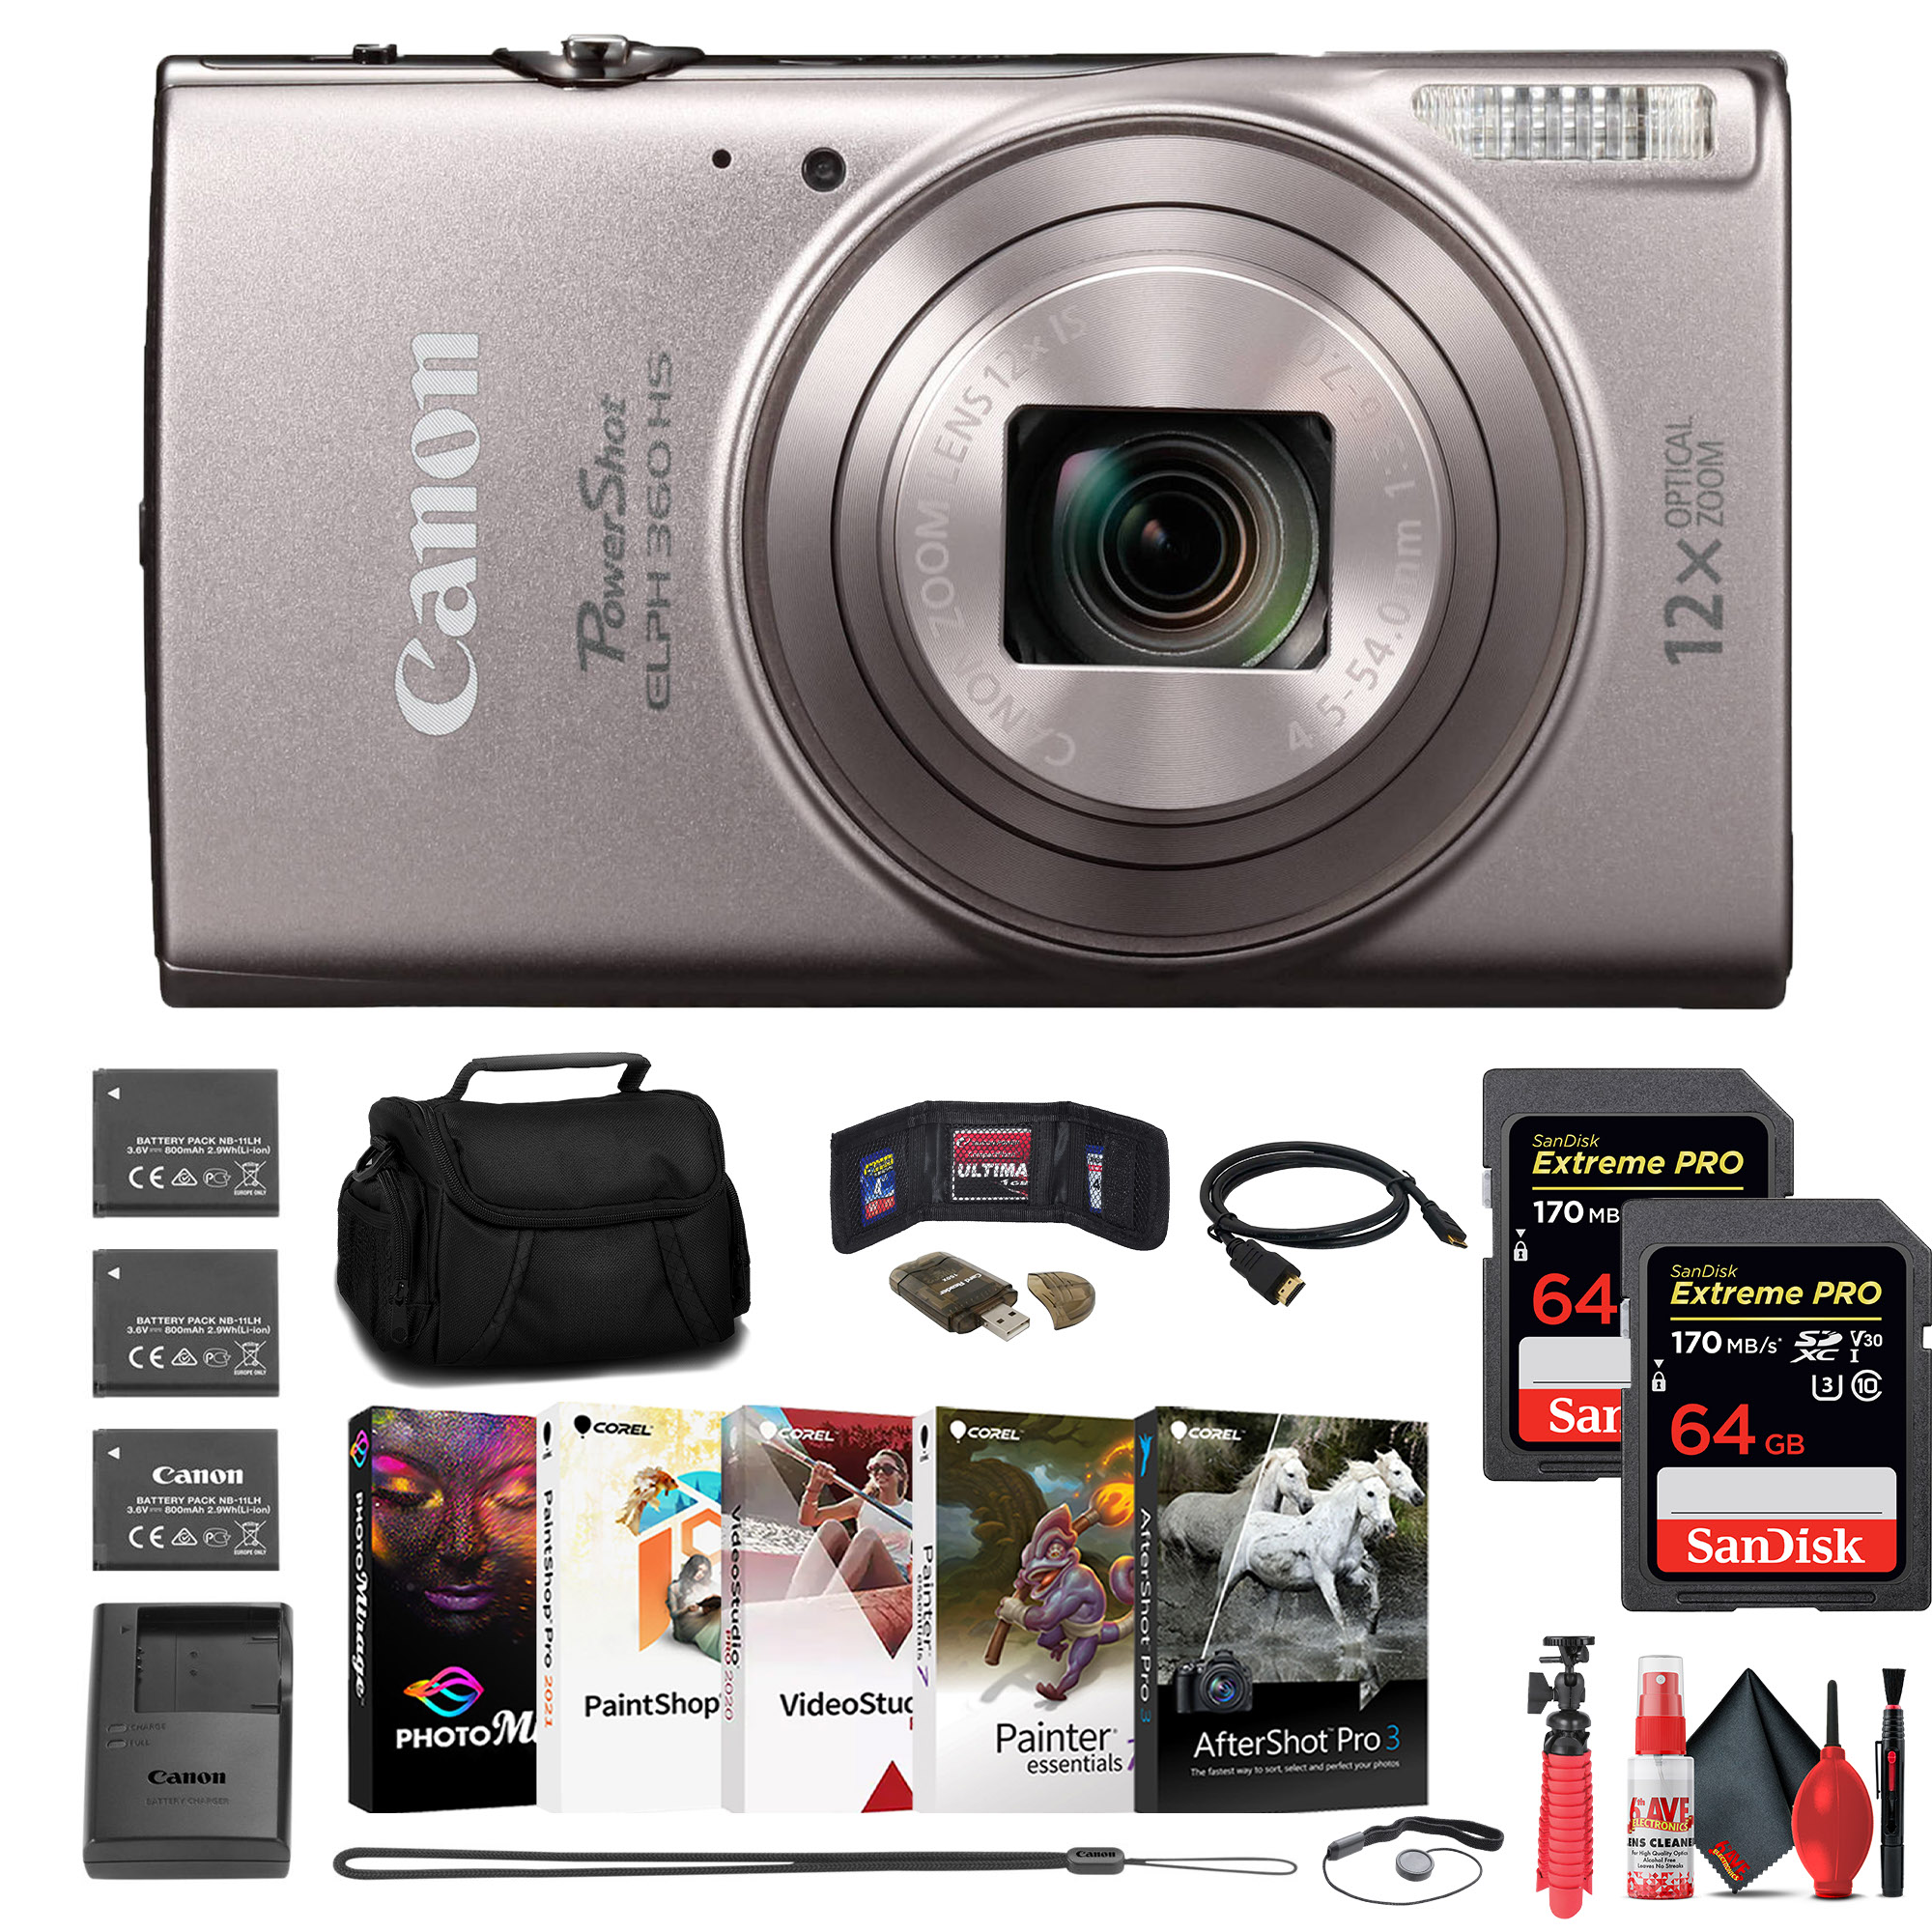 Canon PowerShot ELPH 360 HS Camera + 2 x 64GB Card + 2 x Battery + Case + More - image 1 of 8